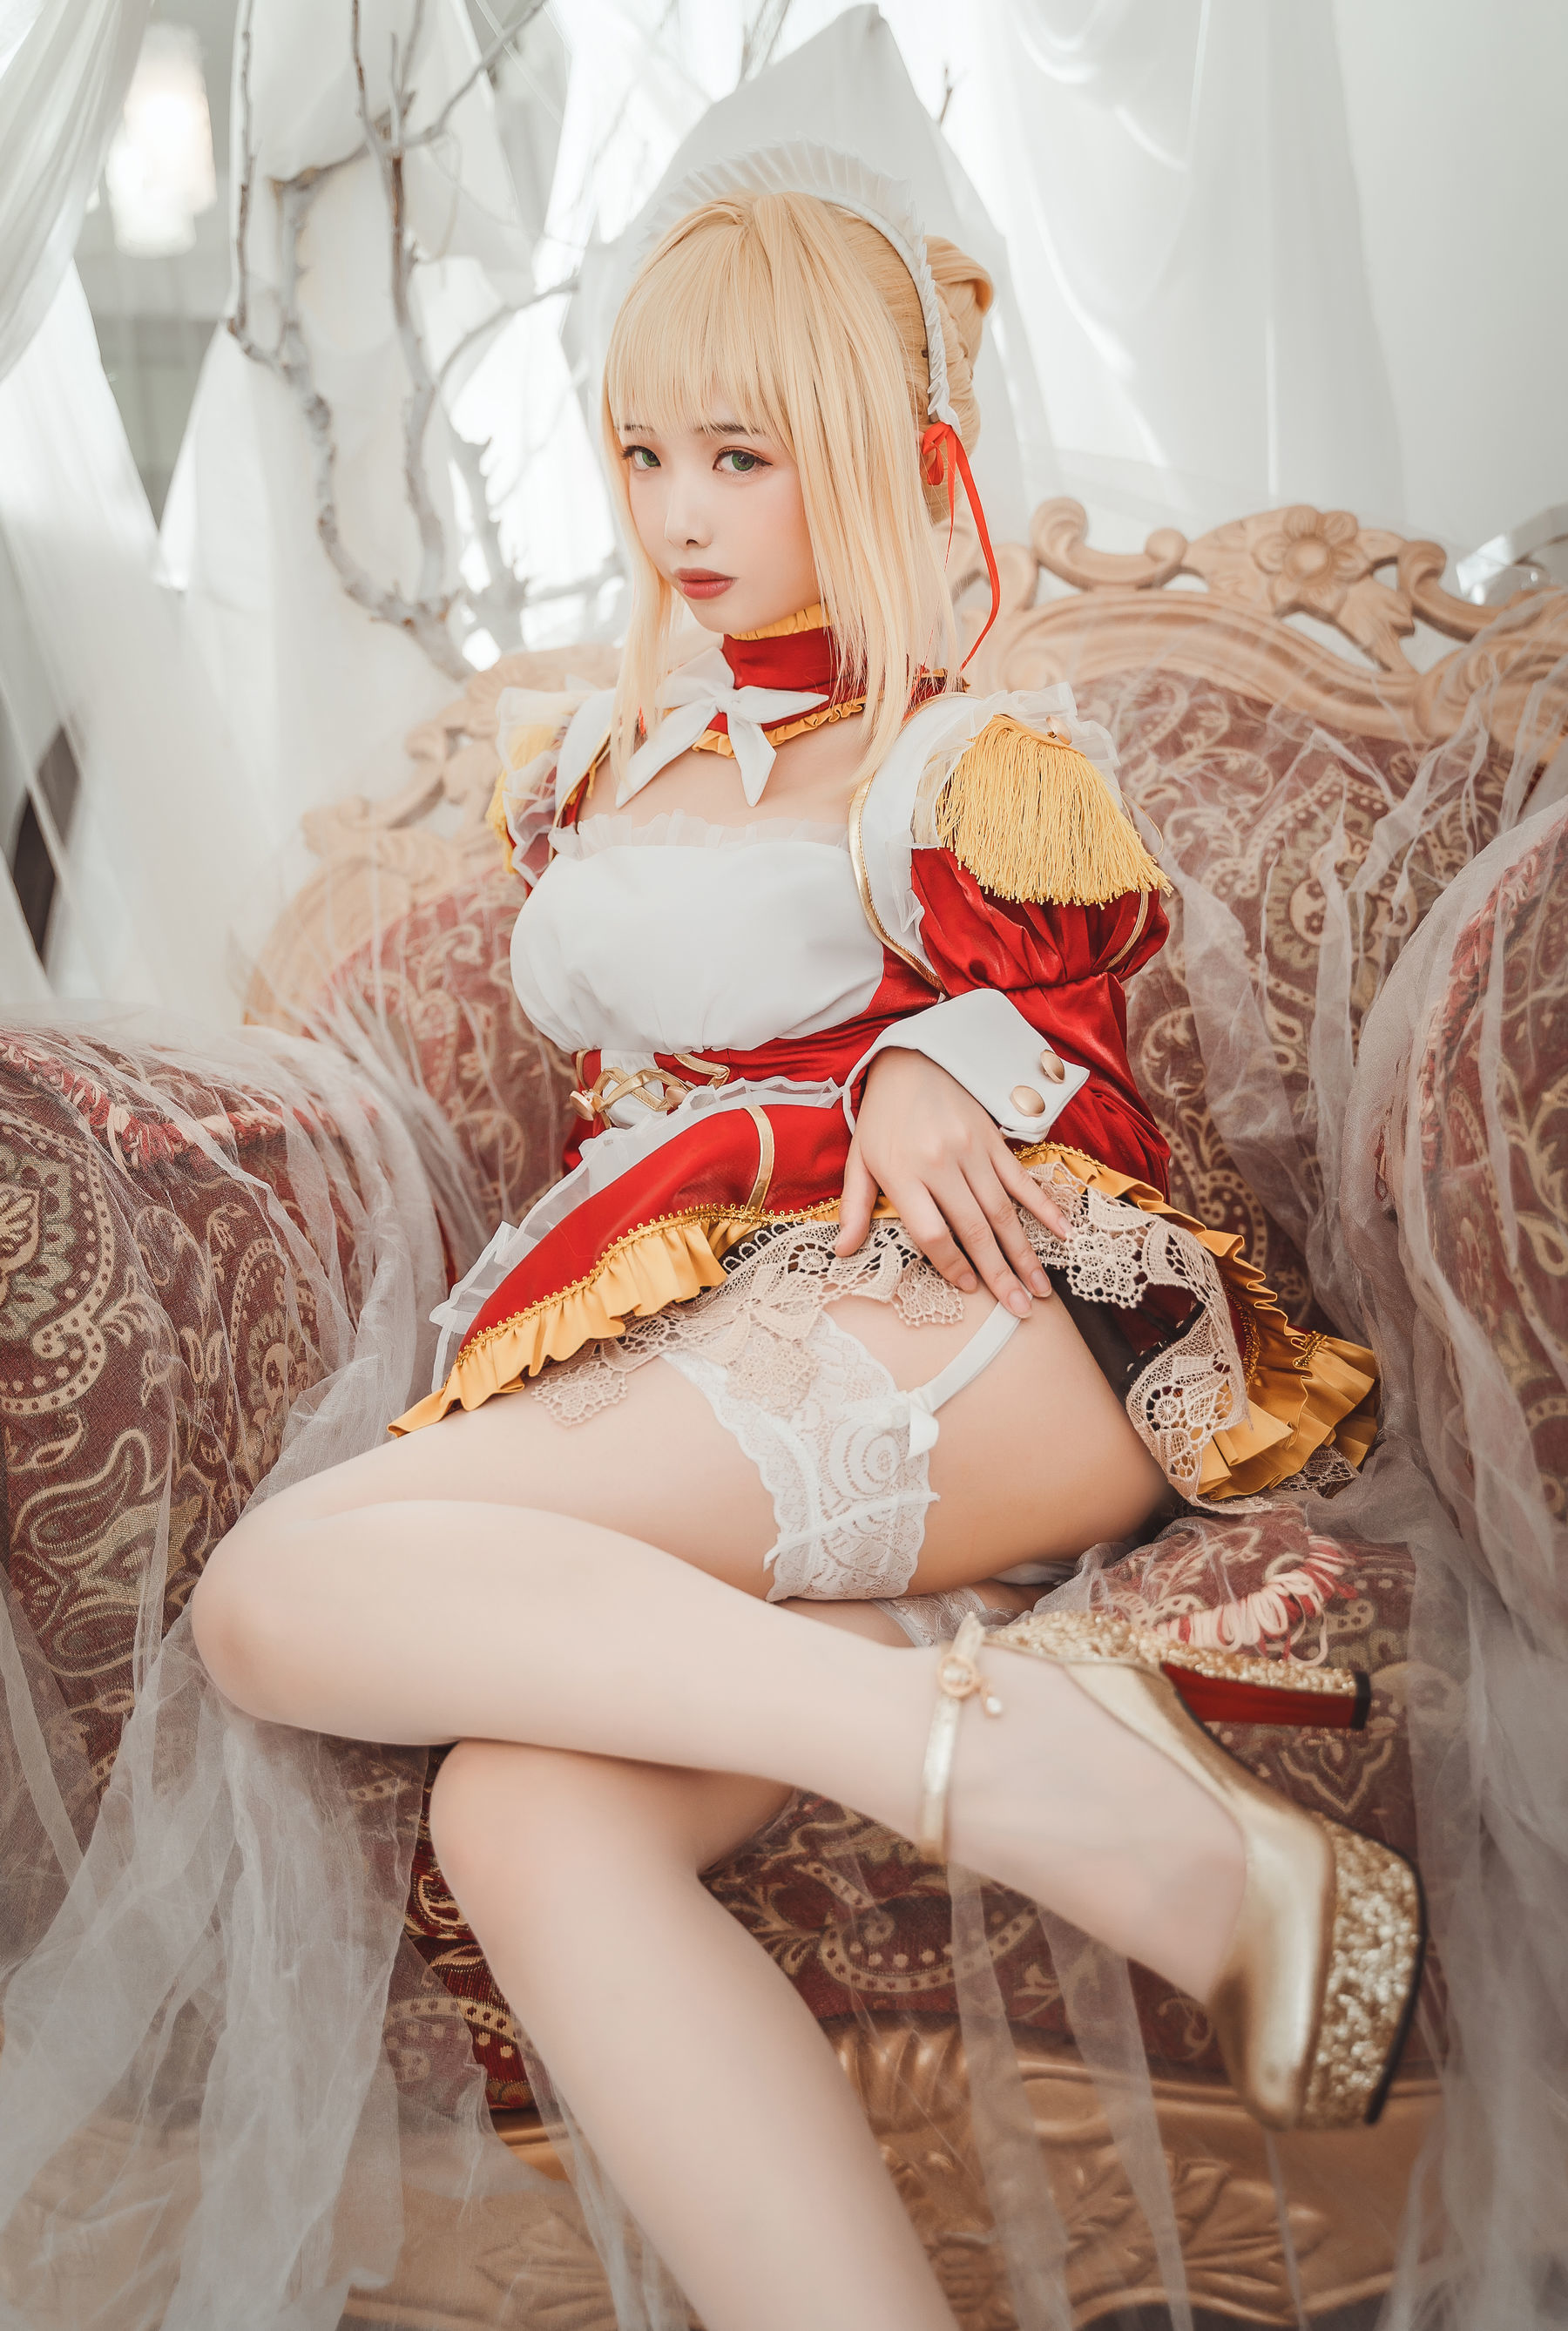 [Beauty Coser] Wenmei "The Maid of Nero" Page 1 No.dcb8a1